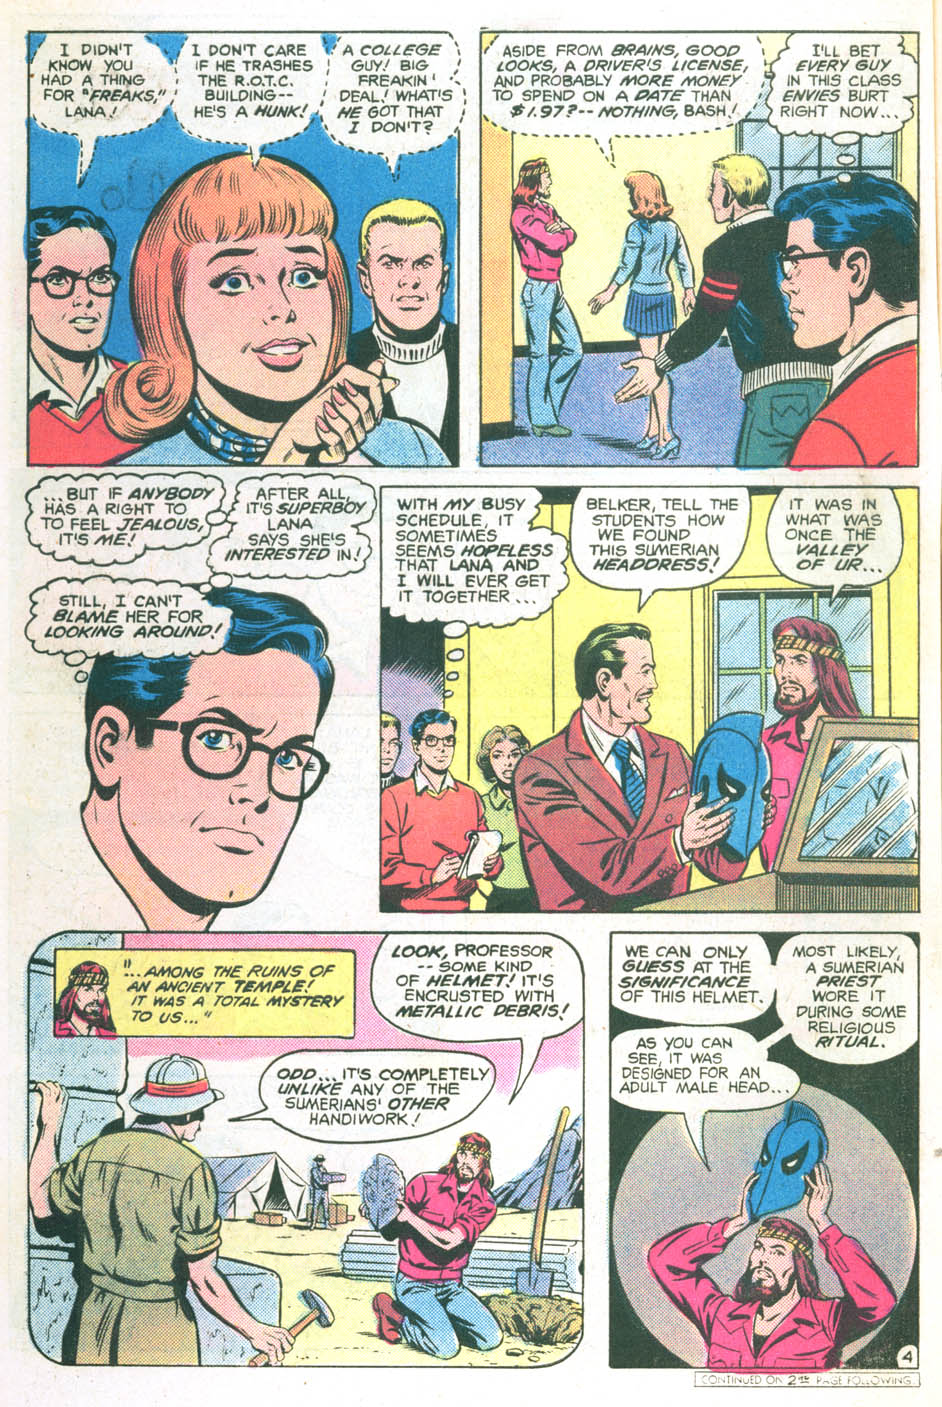 The New Adventures of Superboy 25 Page 4